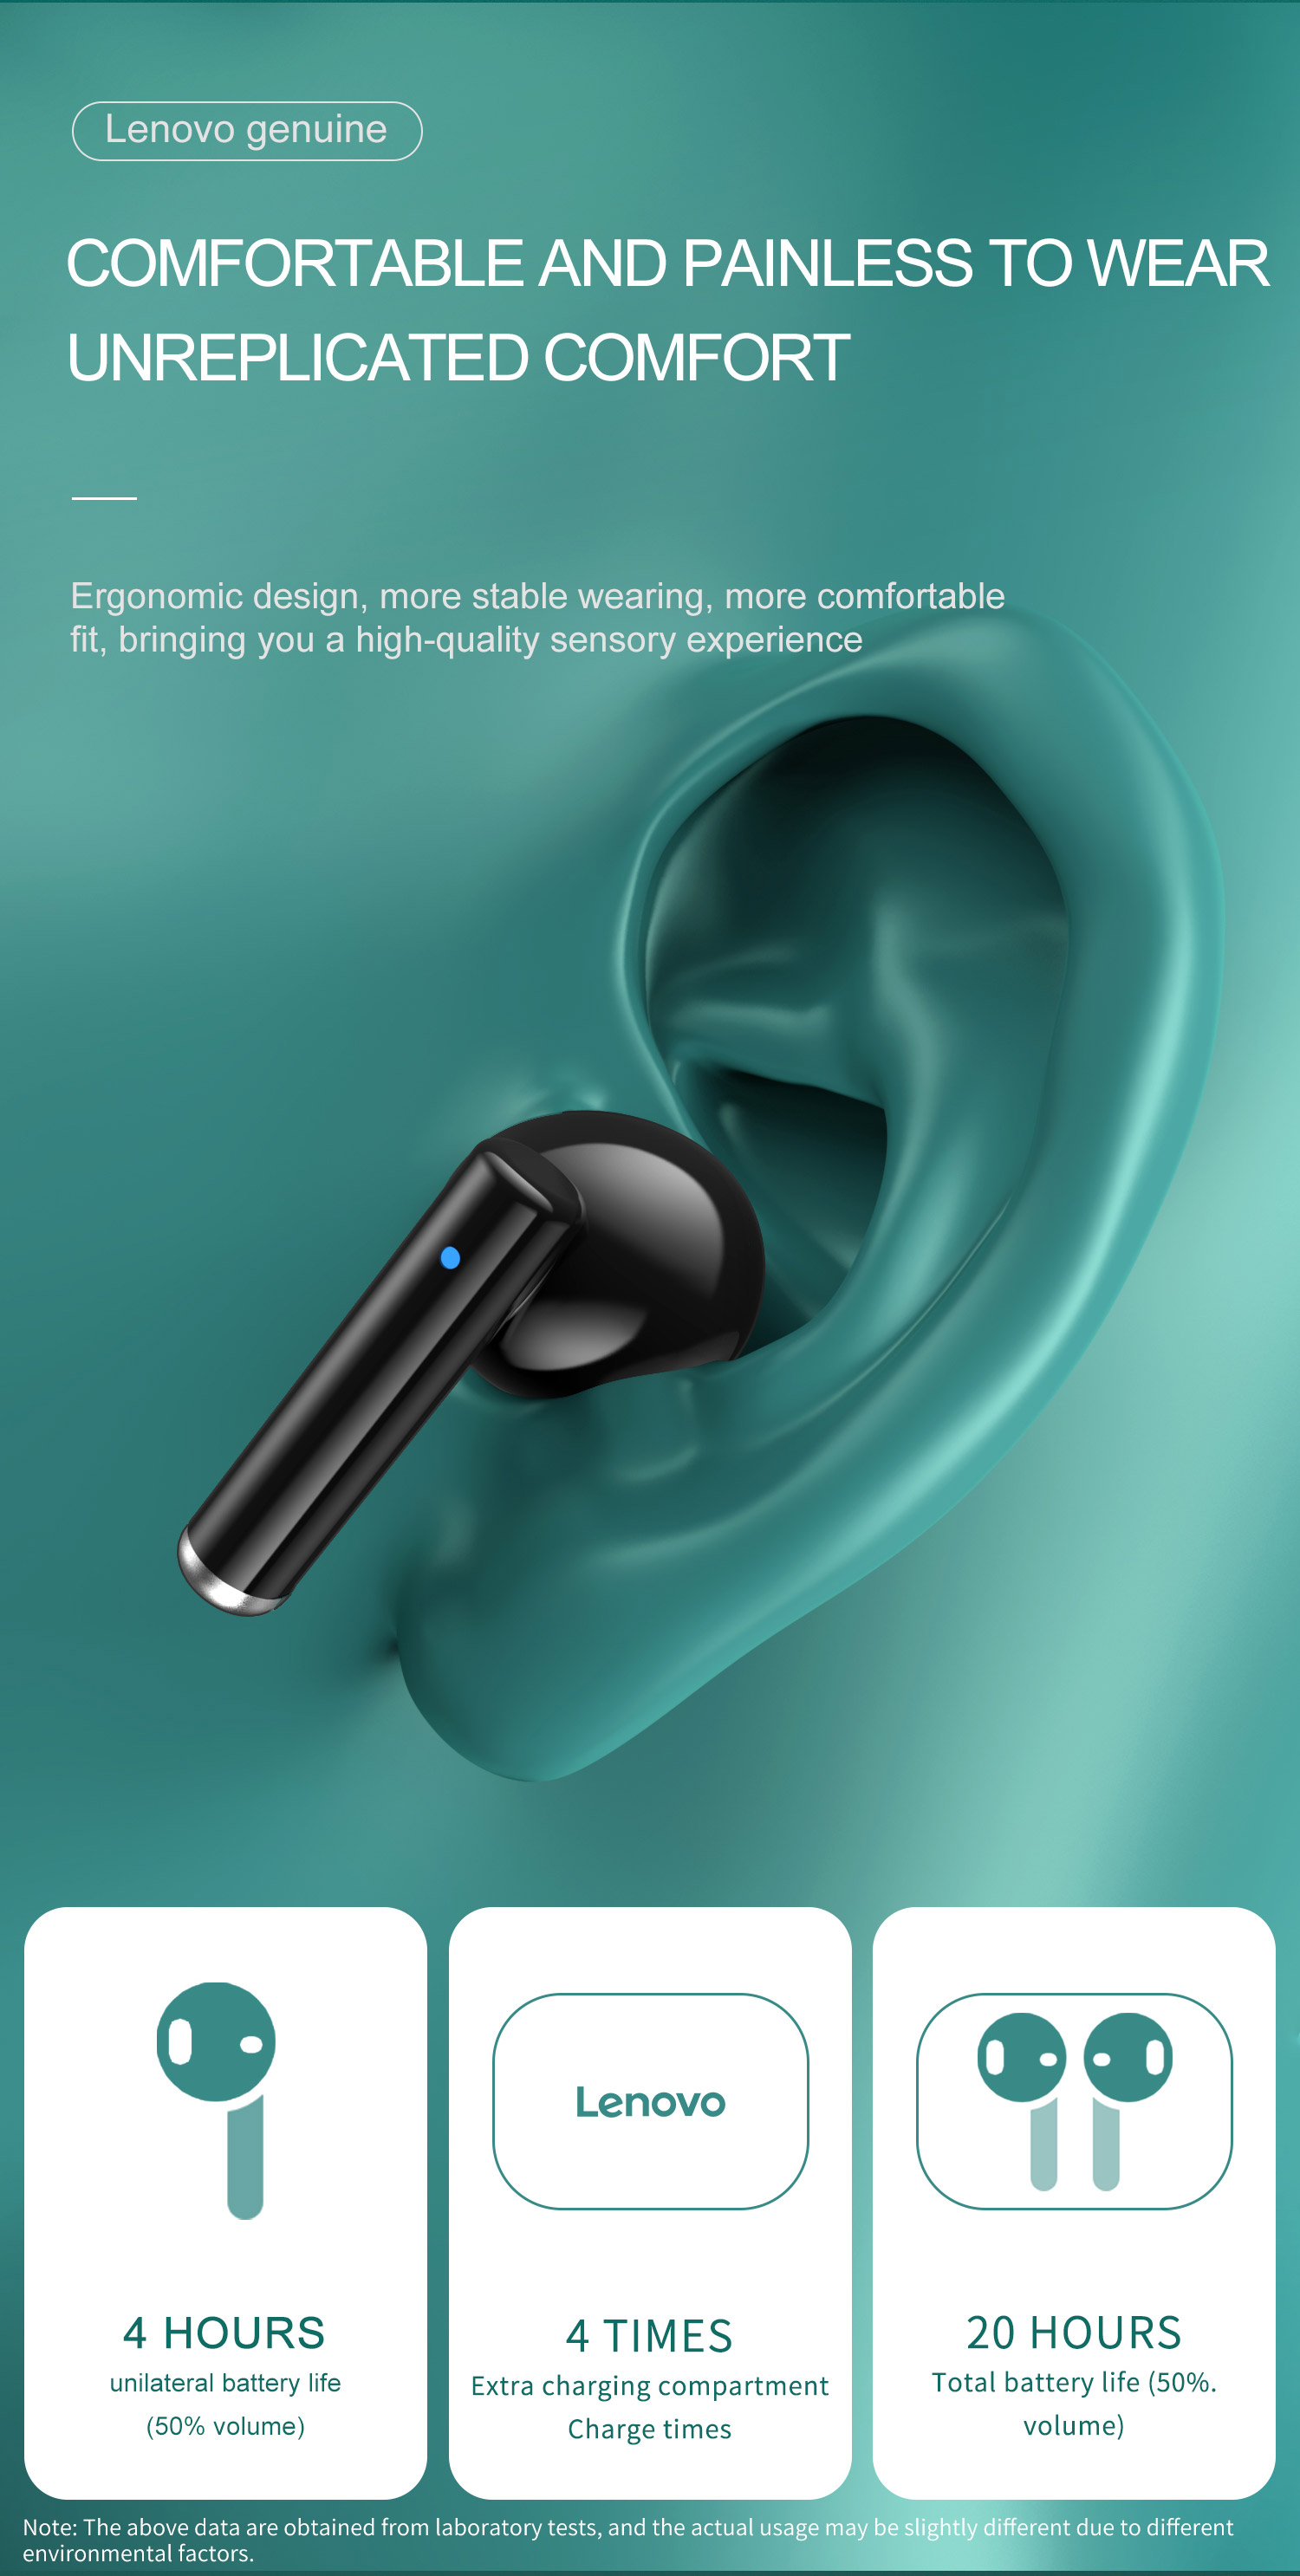 Lenovo-HT06-TWS-Wireless-Earbuds-bluetooth-51-Earphone-Stereo-Dual-Mic-Noise-Cancelling-Touch-Contro-1873400-10